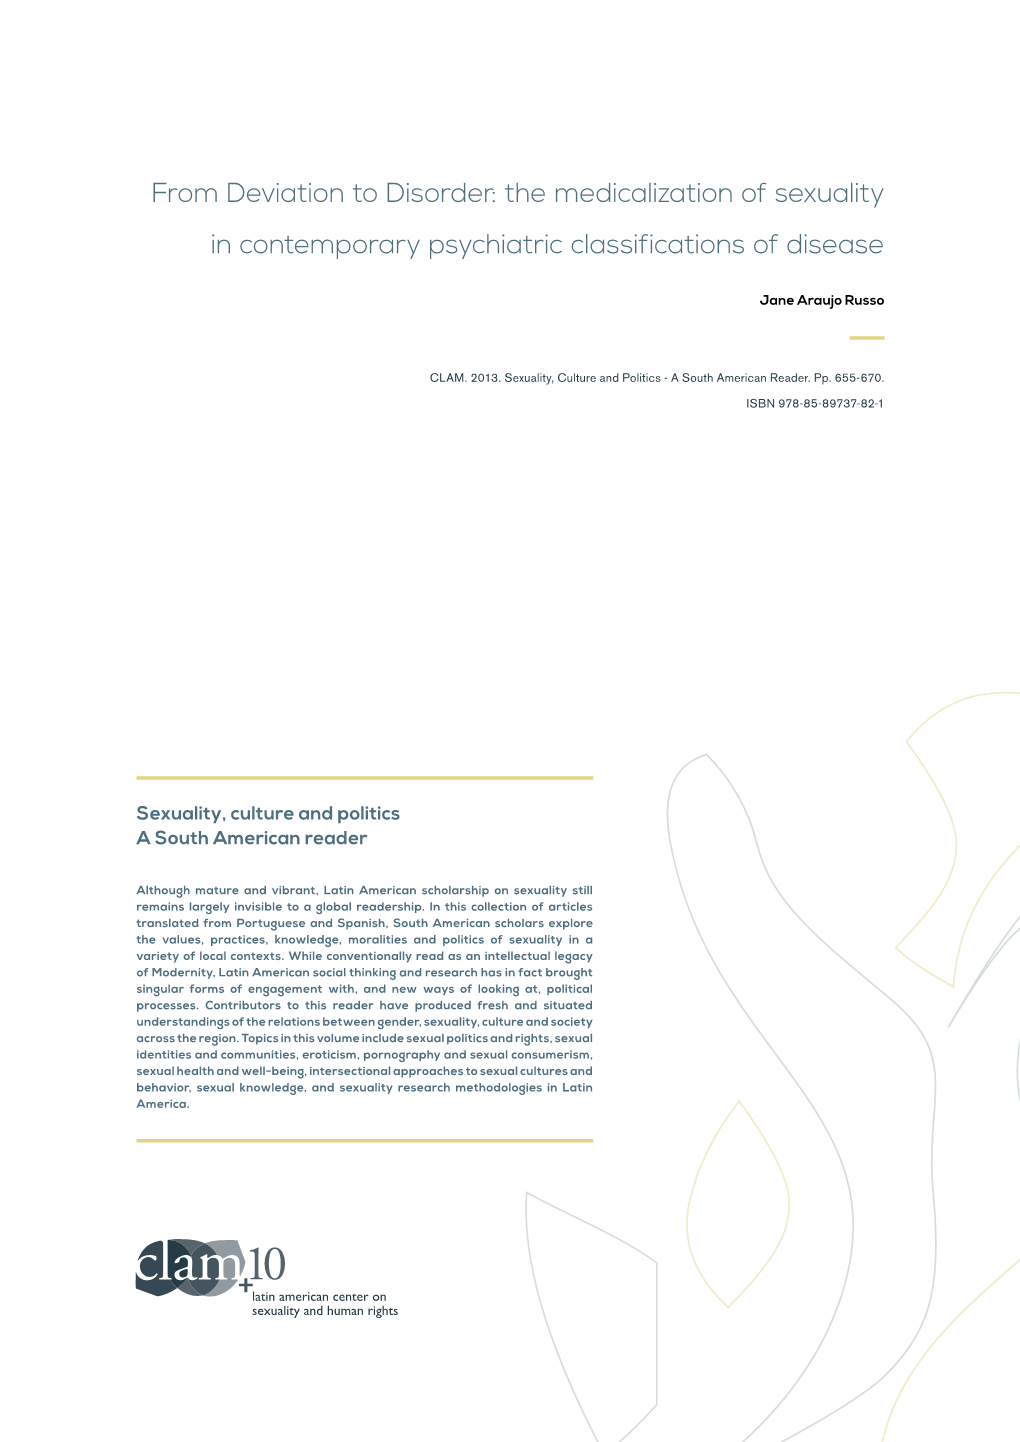 From Deviation to Disorder: the Medicalization of Sexuality in Contemporary Psychiatric Classifications of Disease